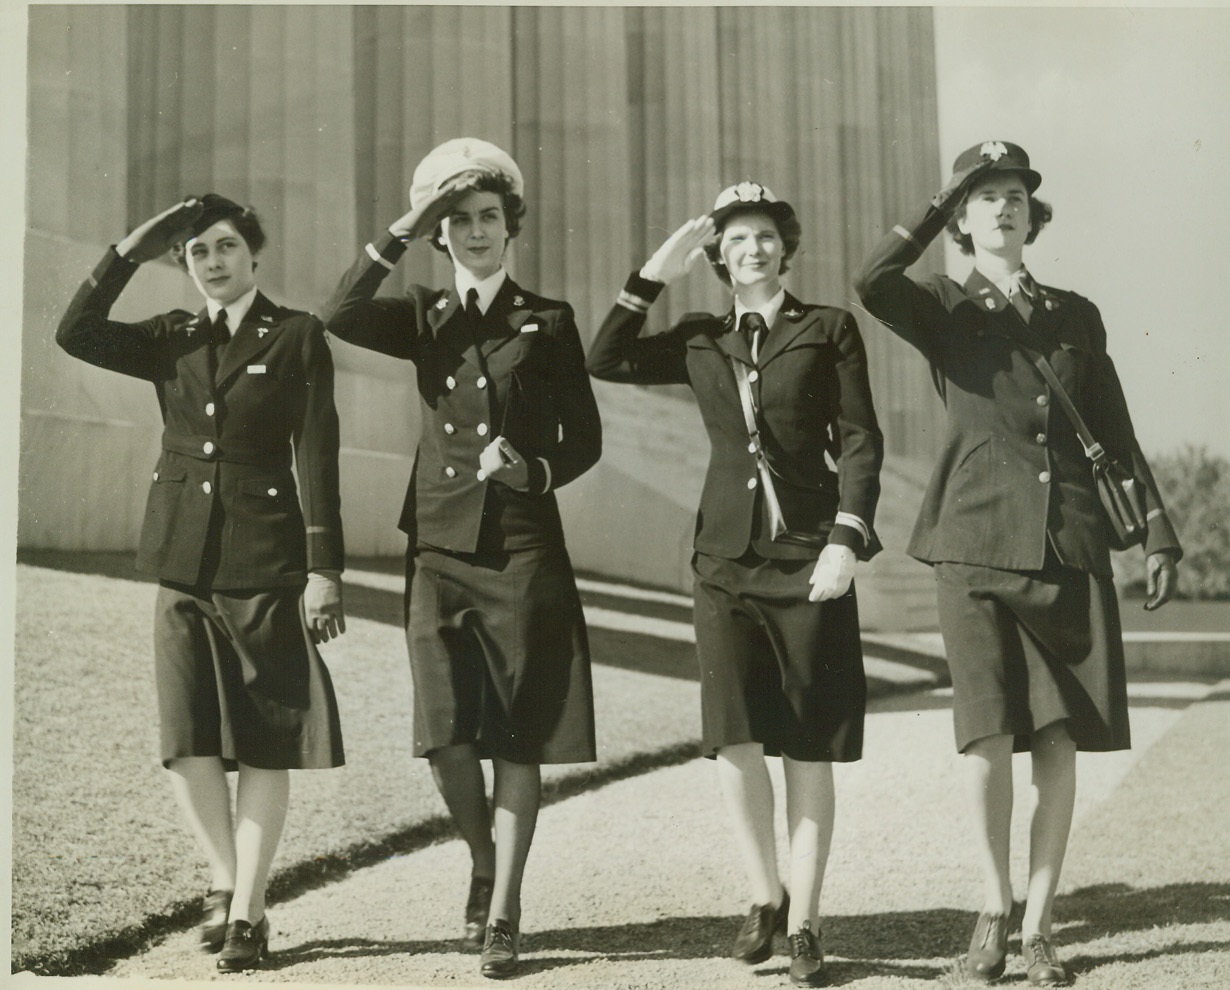 FEMININE SERVICE UNIFORMS, 10/10/1942. WASHINGTON—Attractive, Utilitarian, and Modern are the uniforms that have been approved for wear by the women who are members of the auxiliaries of the U.S. Armed Forces. Here the outfits of the Army Nurse, Navy Nurse, WAVE, WAAC, (Left to Right)- are displayed respectively by Lt. Doris Hyde of Lancaster, PA., Ensign Mary E. Hill of Elizabeth City, N.C., Lt. (JG) Marion Enright of Forest Hills, NY and Third Officer Alberta Holdsworth of Boston, NY. Credit: OWI Radiophoto from ACME;